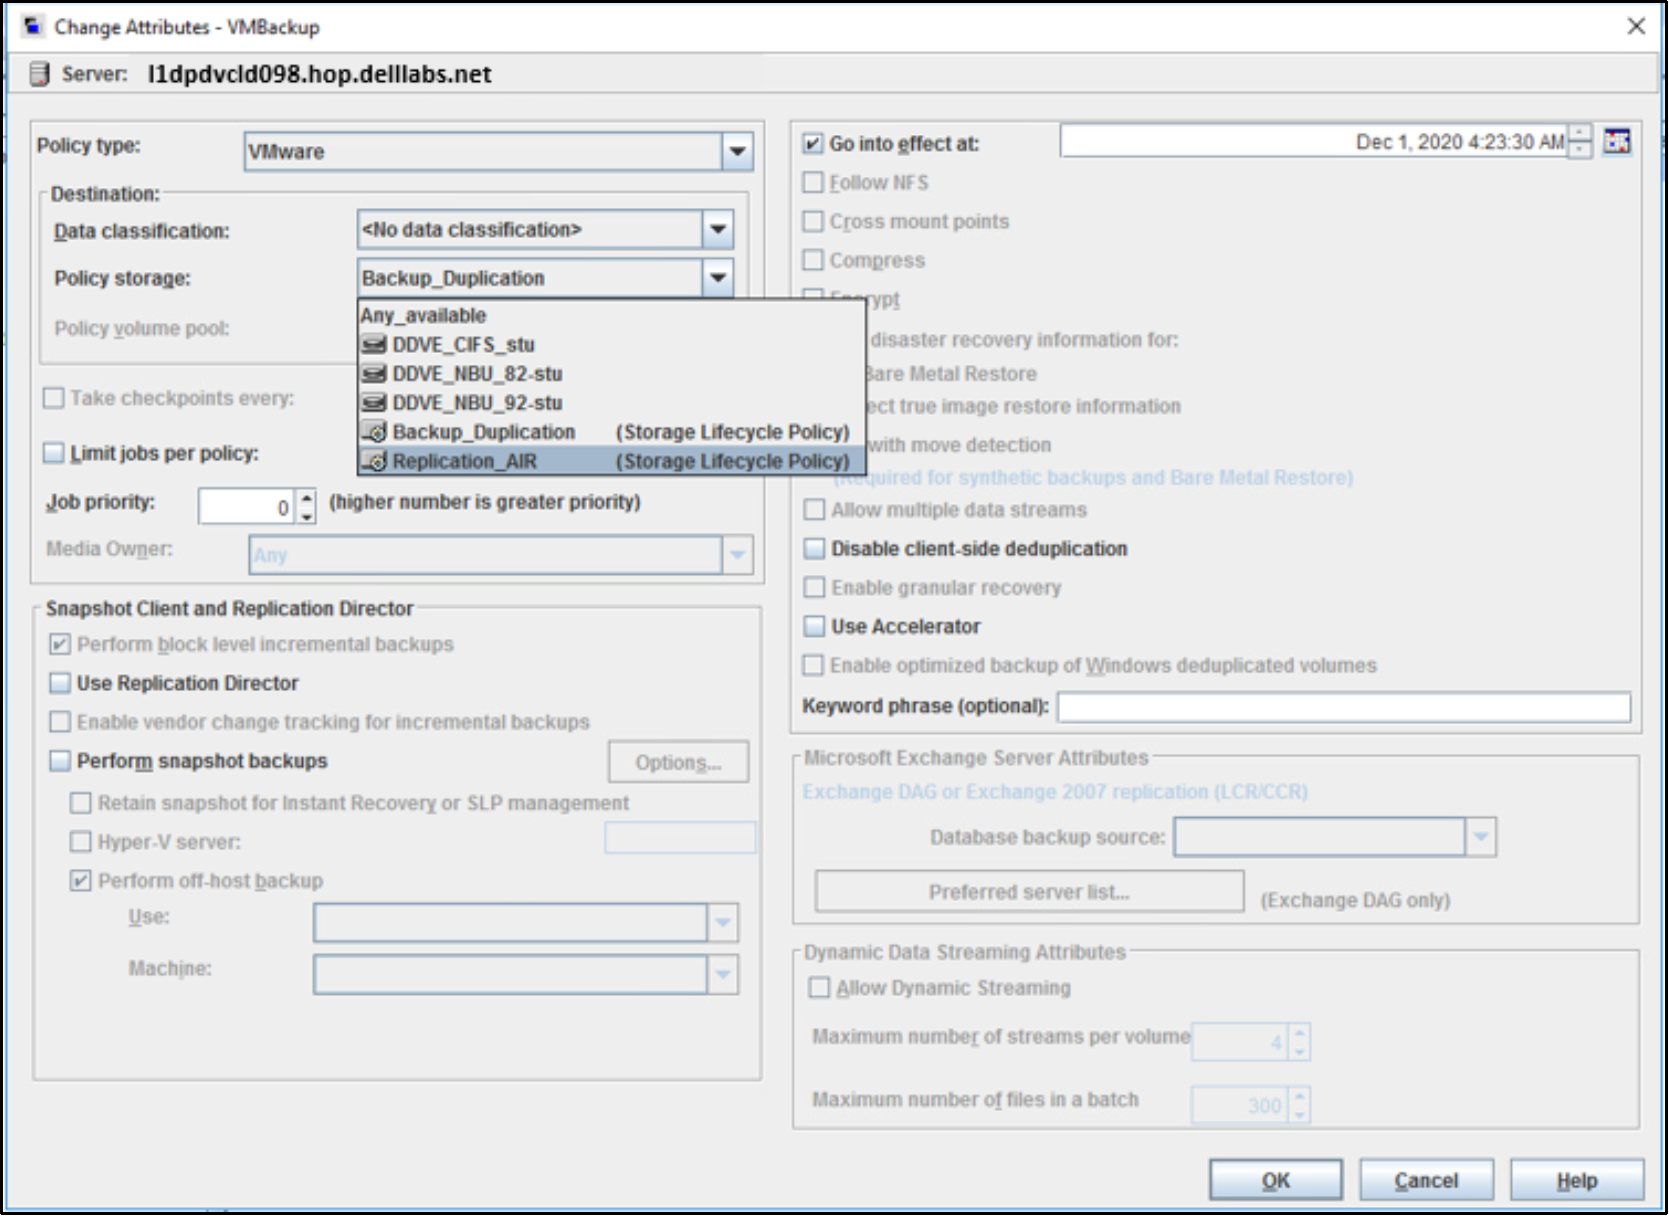 The image shows the option to select the SLP created for backup policy.